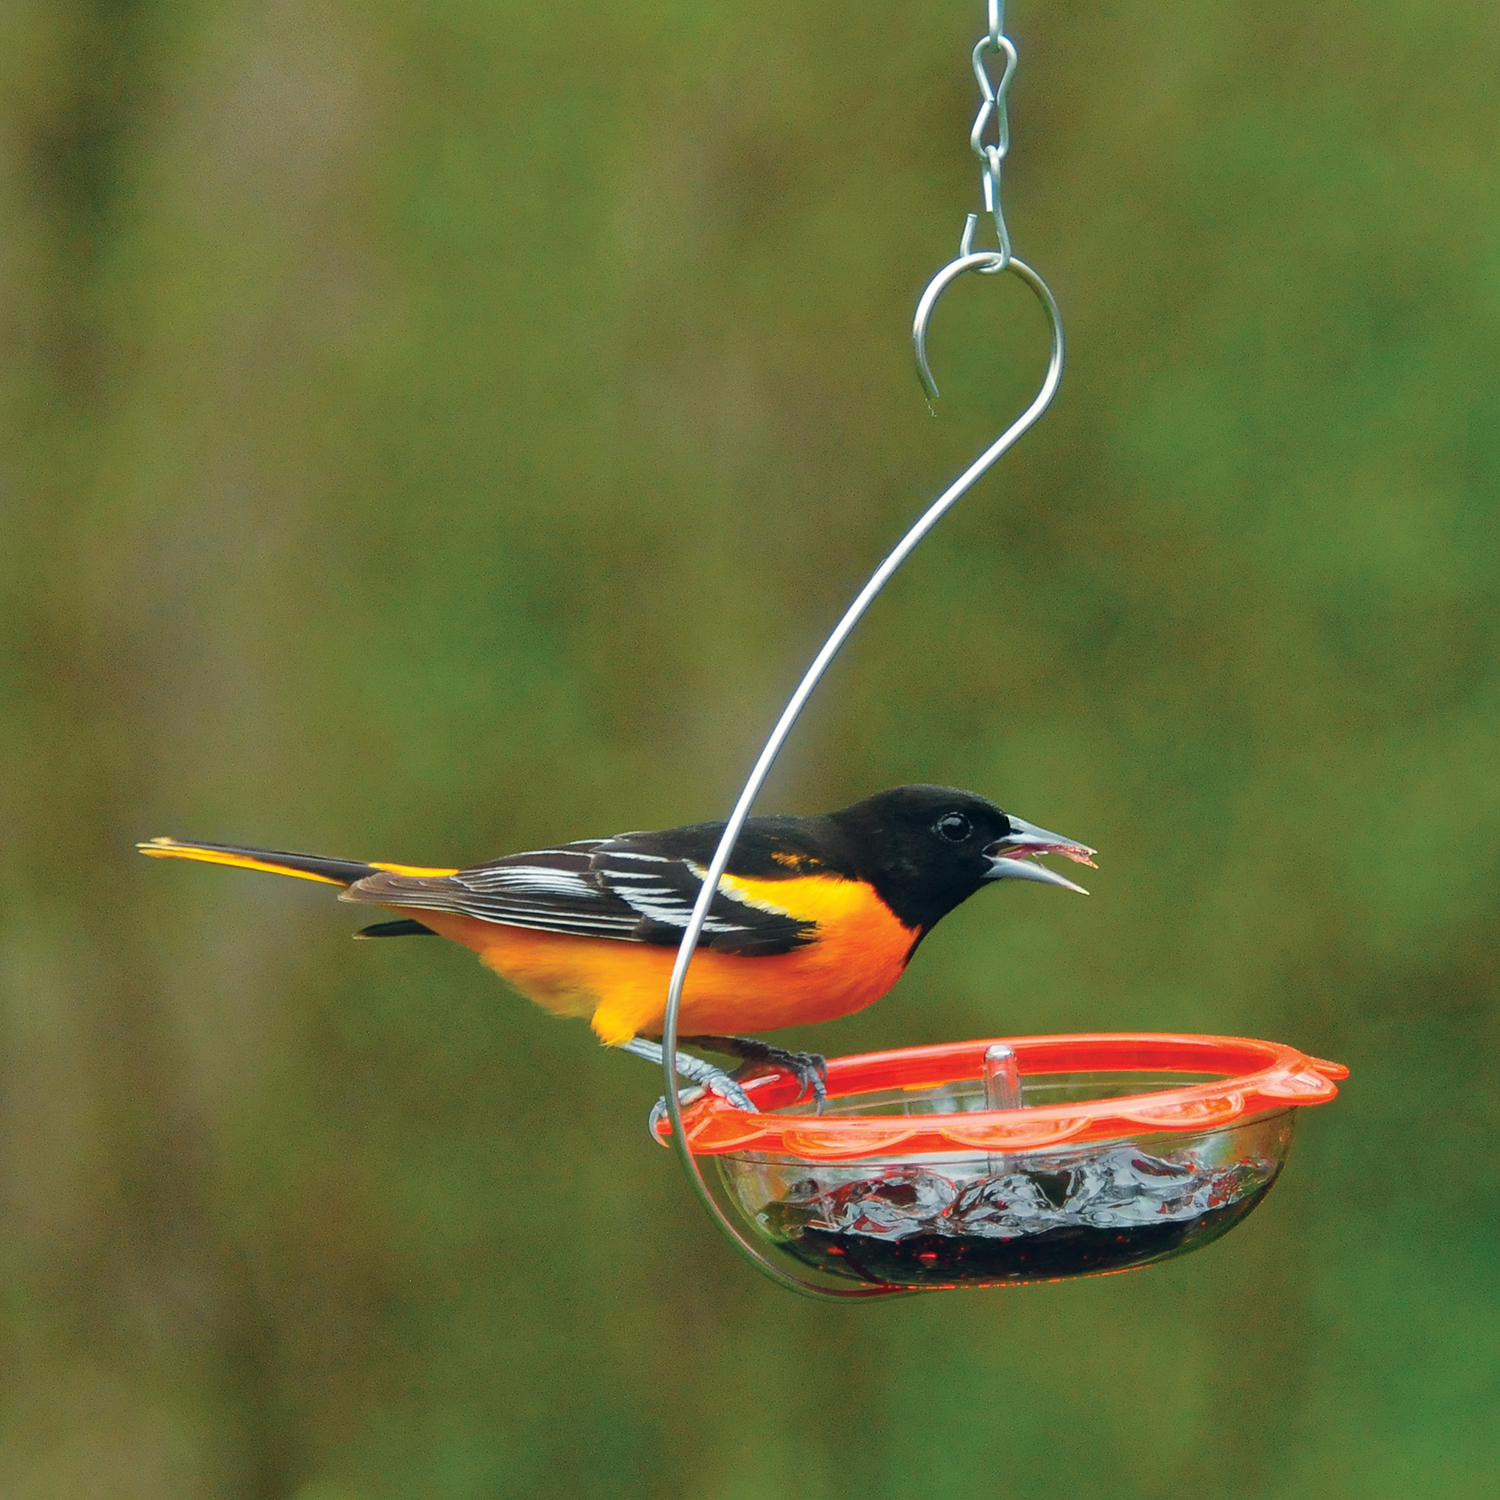 An Oriole visits the BO's Marmalade Hanging Oriole Feeder